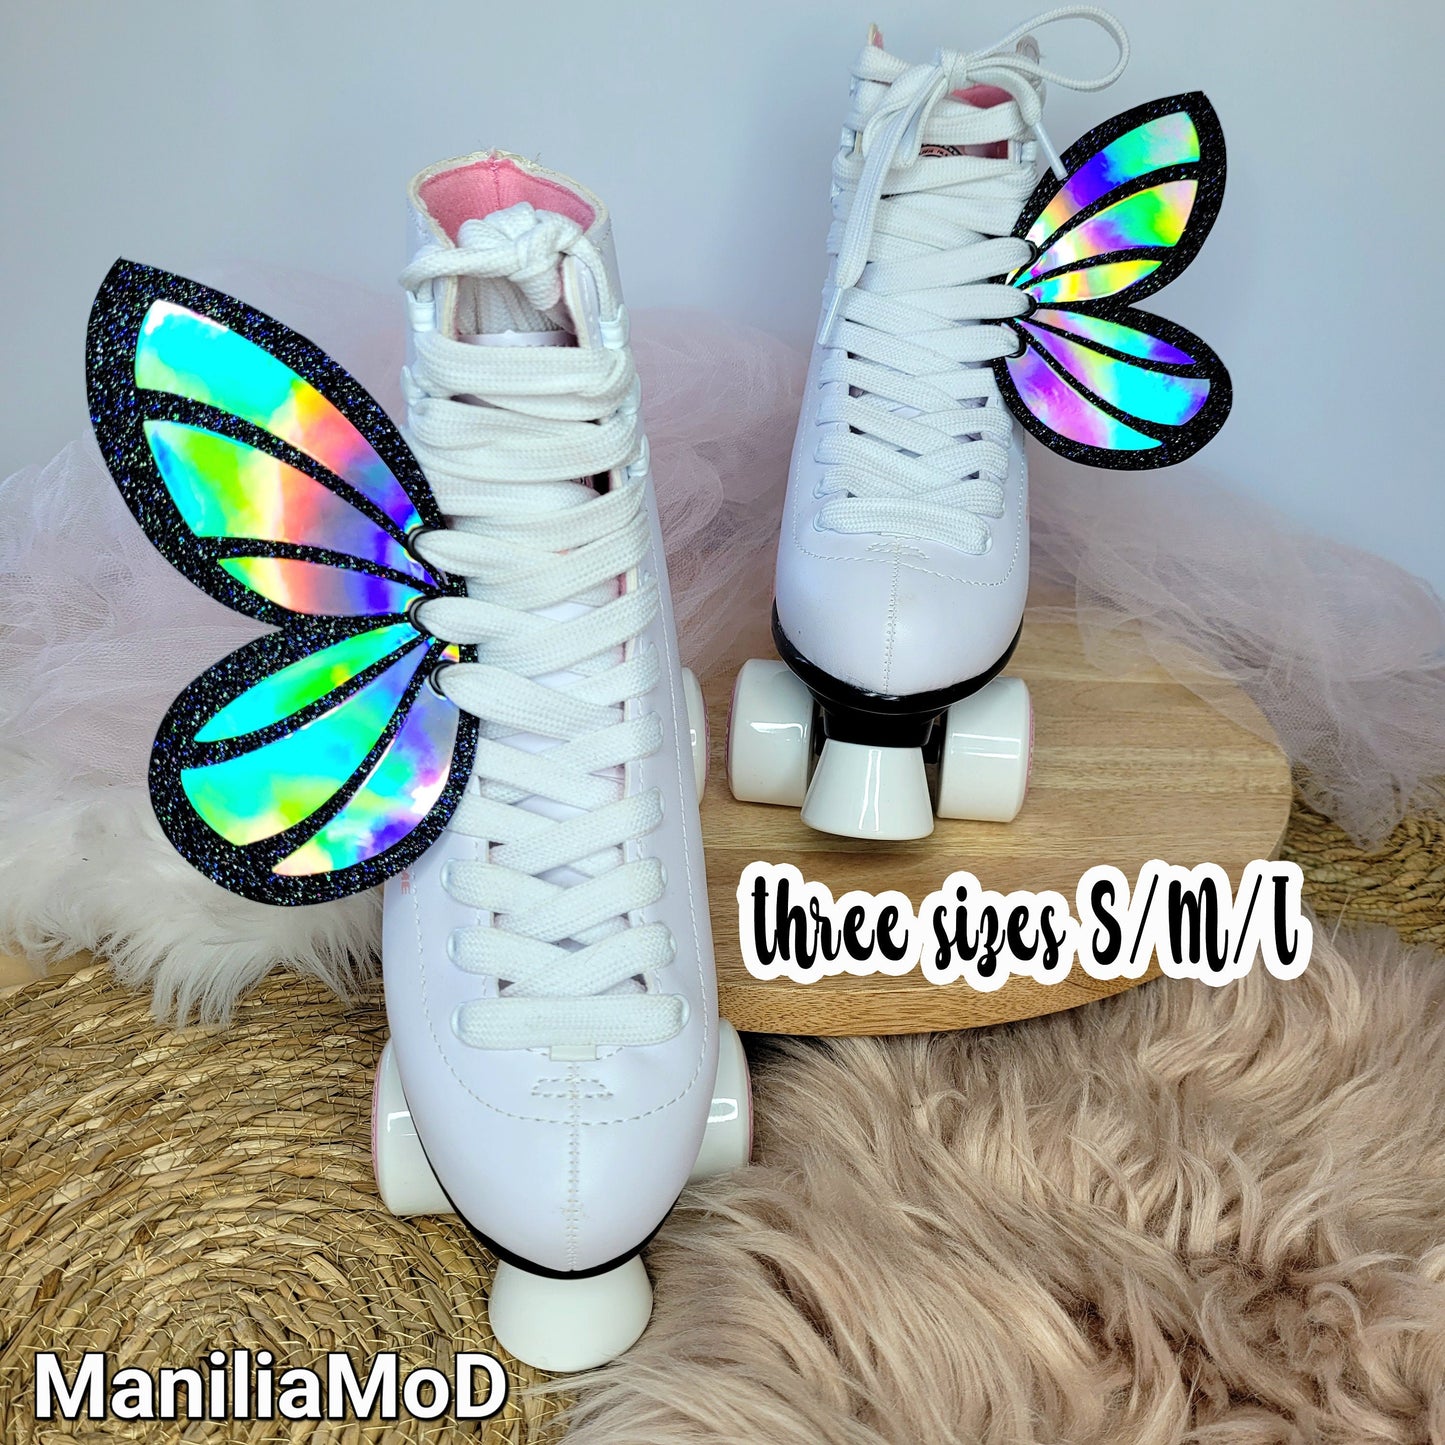 Opal Butterfly Wings, wings for shoes and roller skates, Glitter Butterfly Wings, skate wings,large shoe wings,holographic wings,three sizes